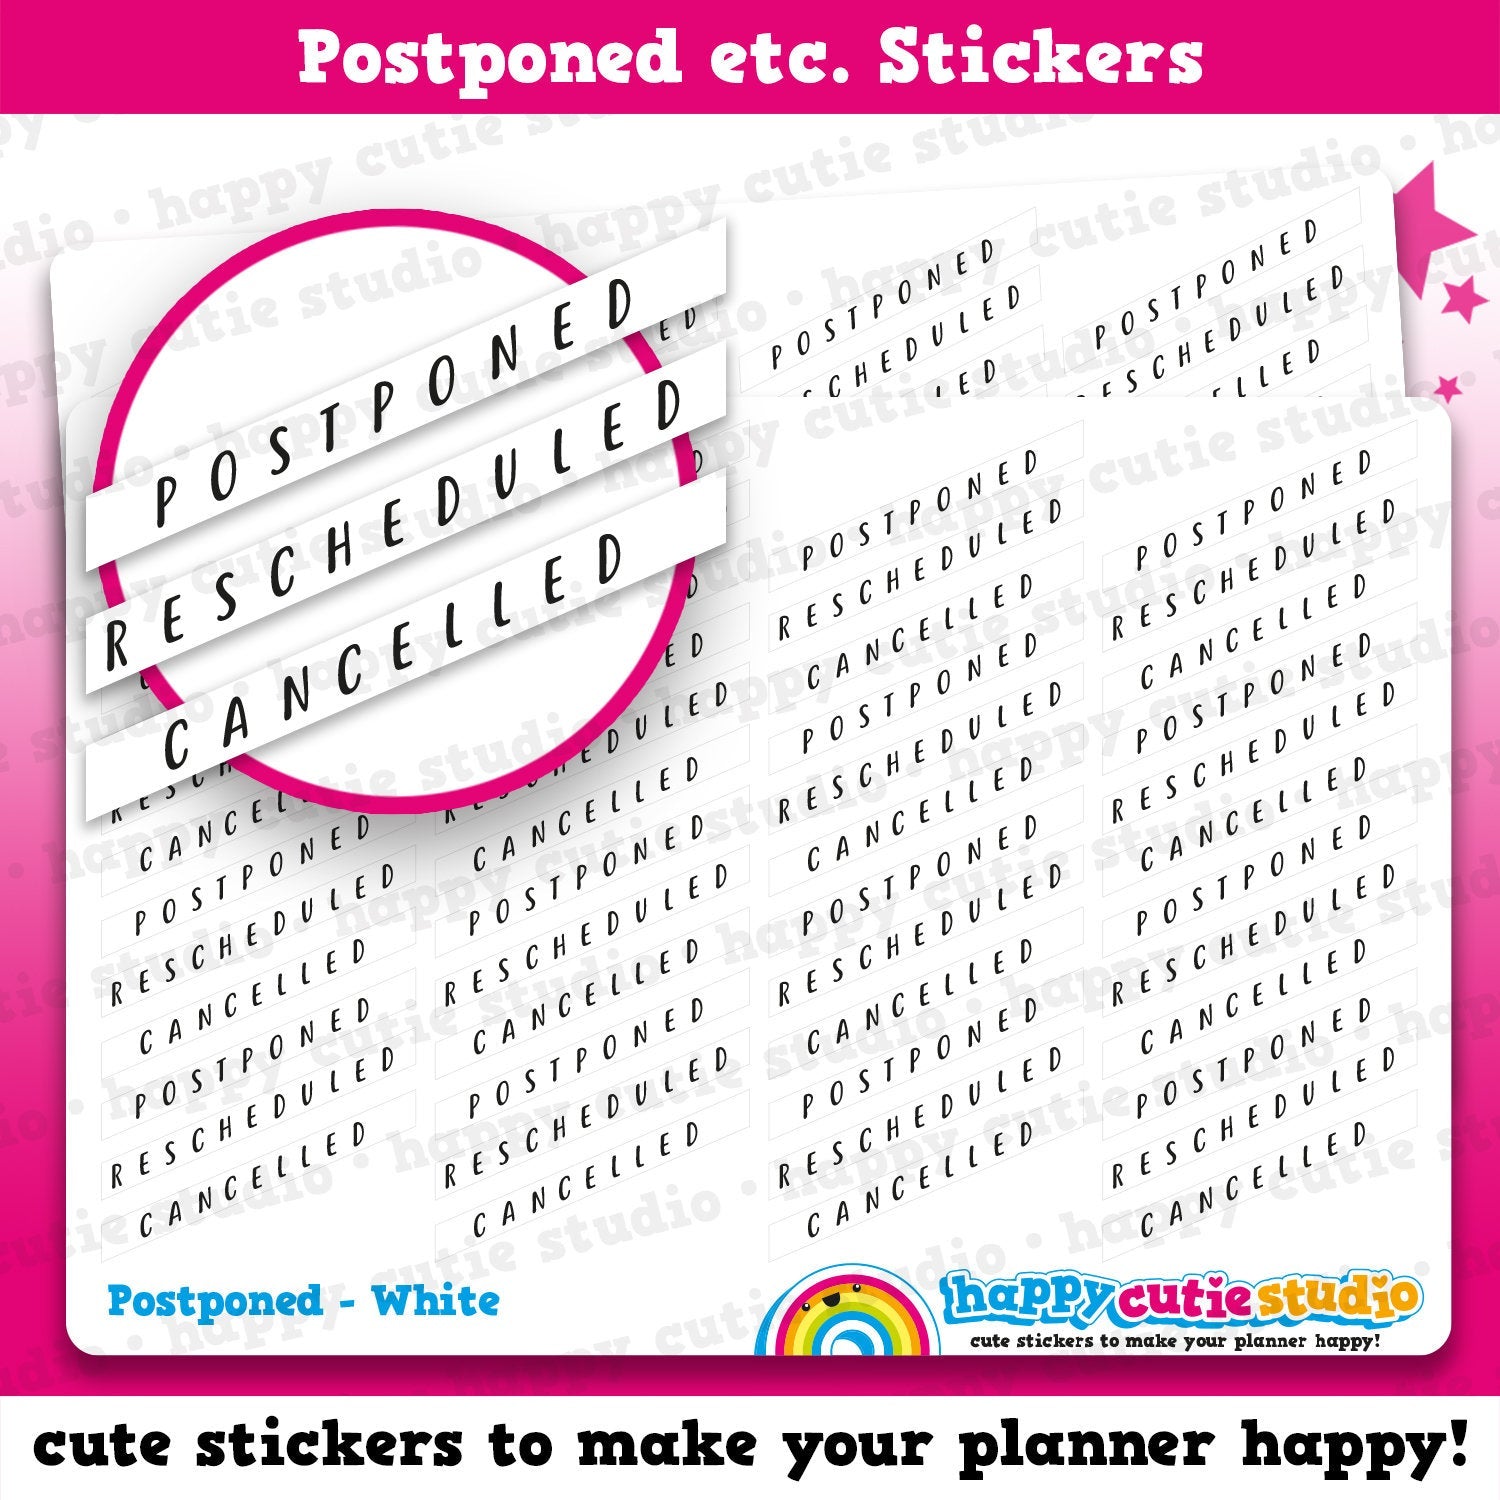 48 Cute Postponed/Rescheduled/Cancelled/Functional Planner Stickers